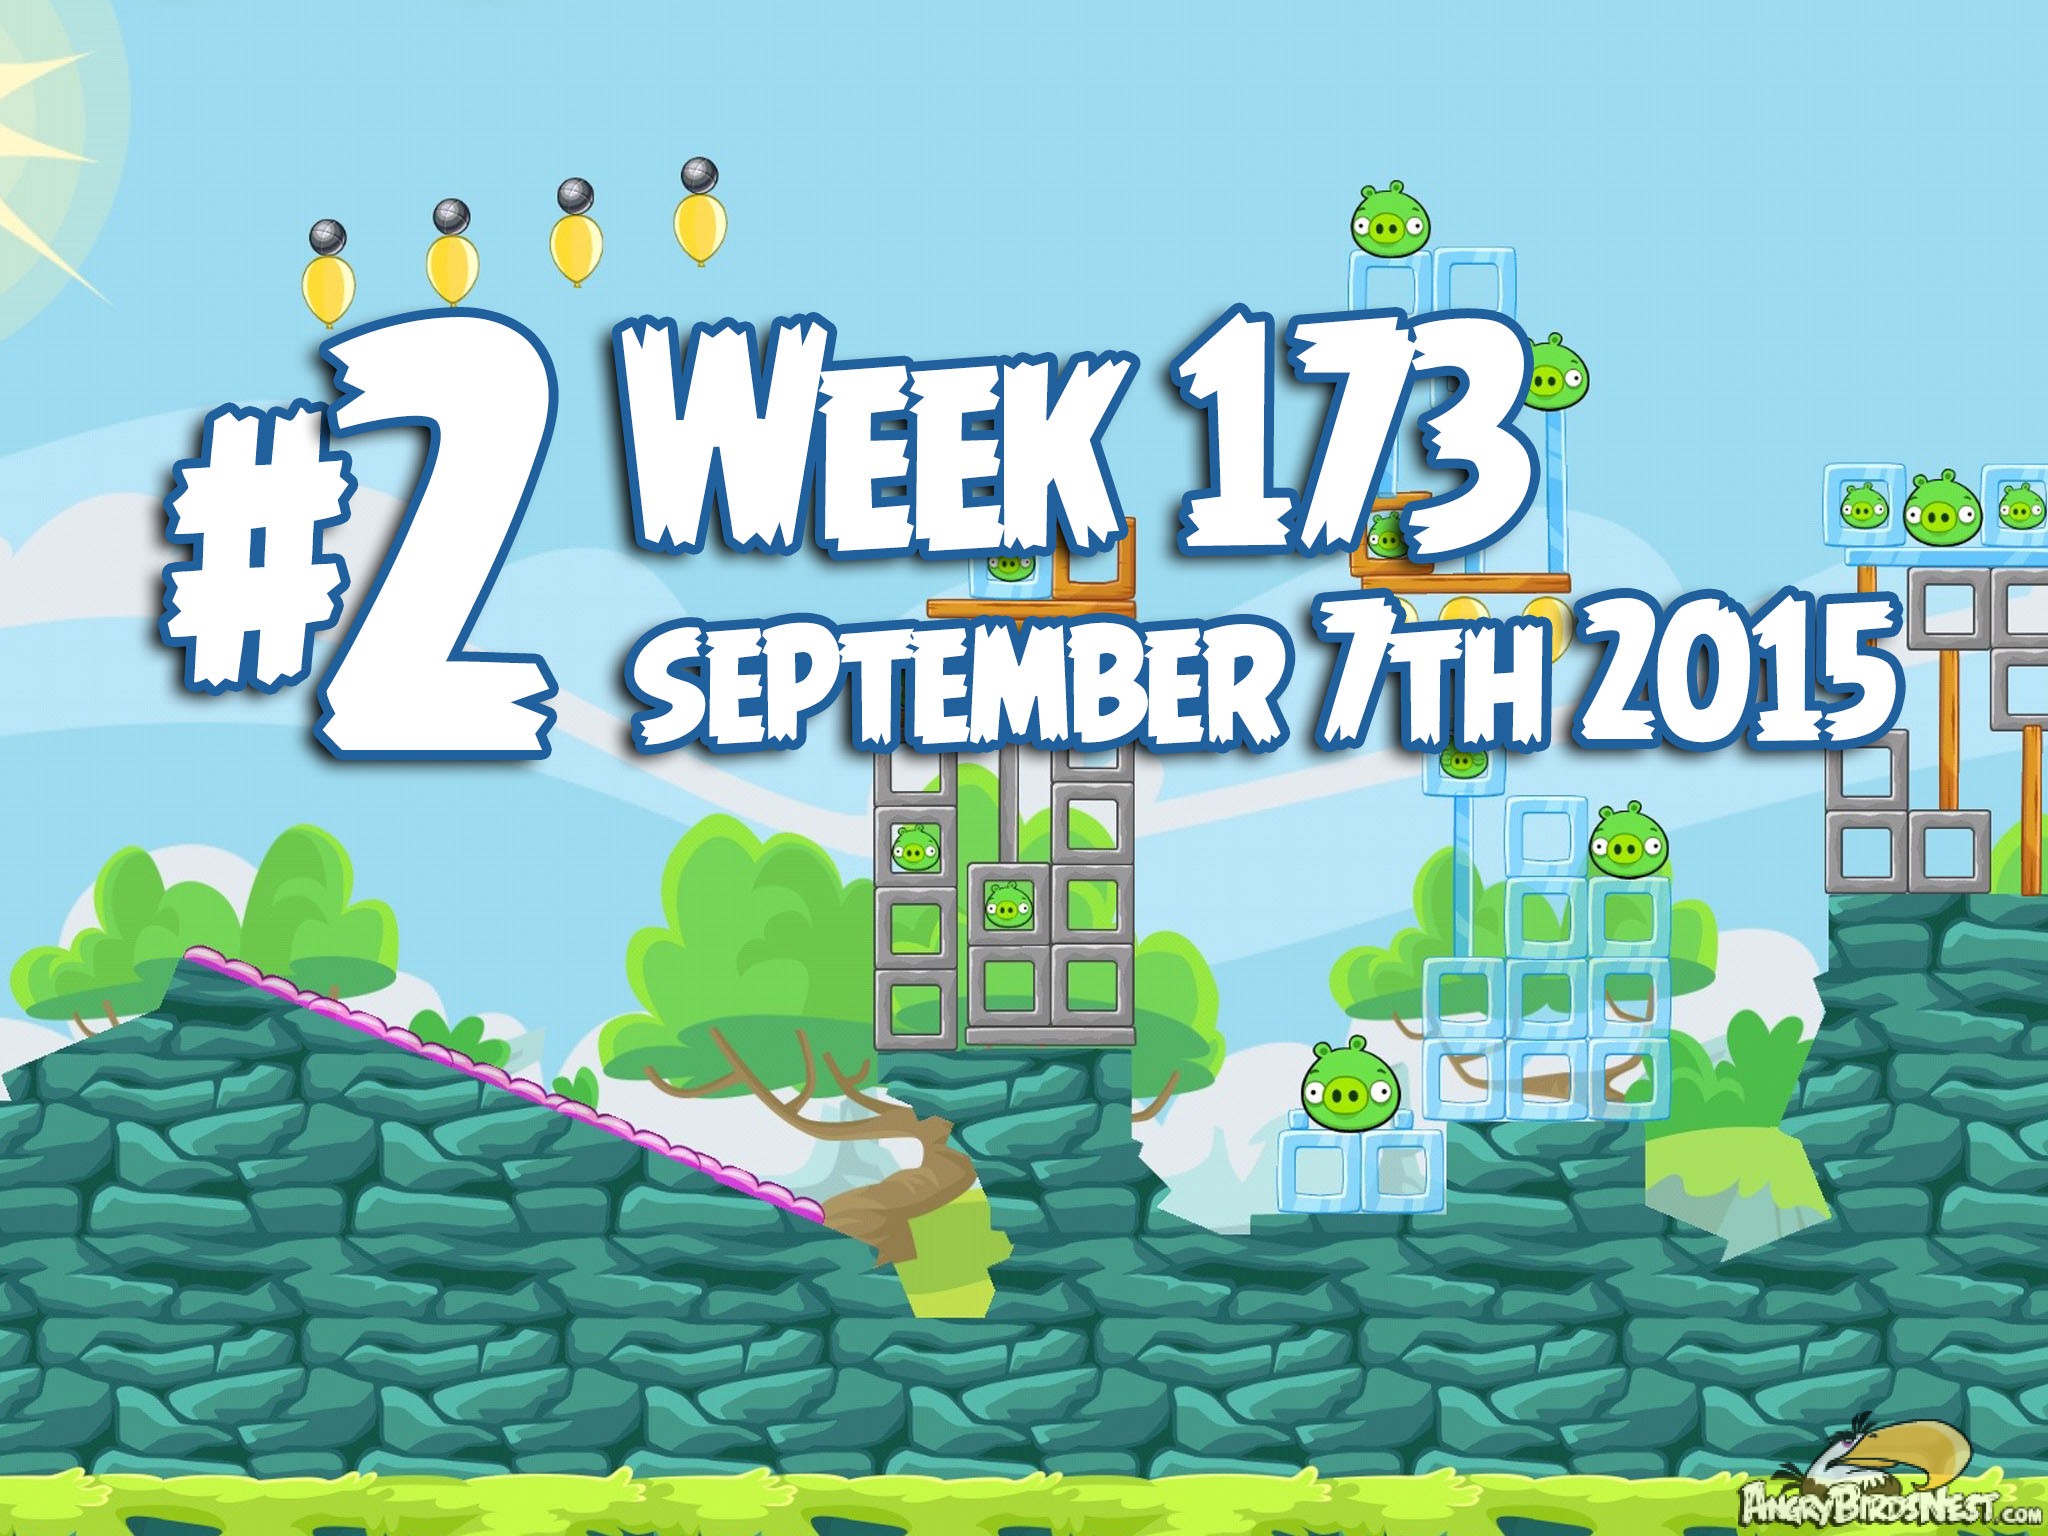 Angry Birds Friends Tournament Week 173 Level 2